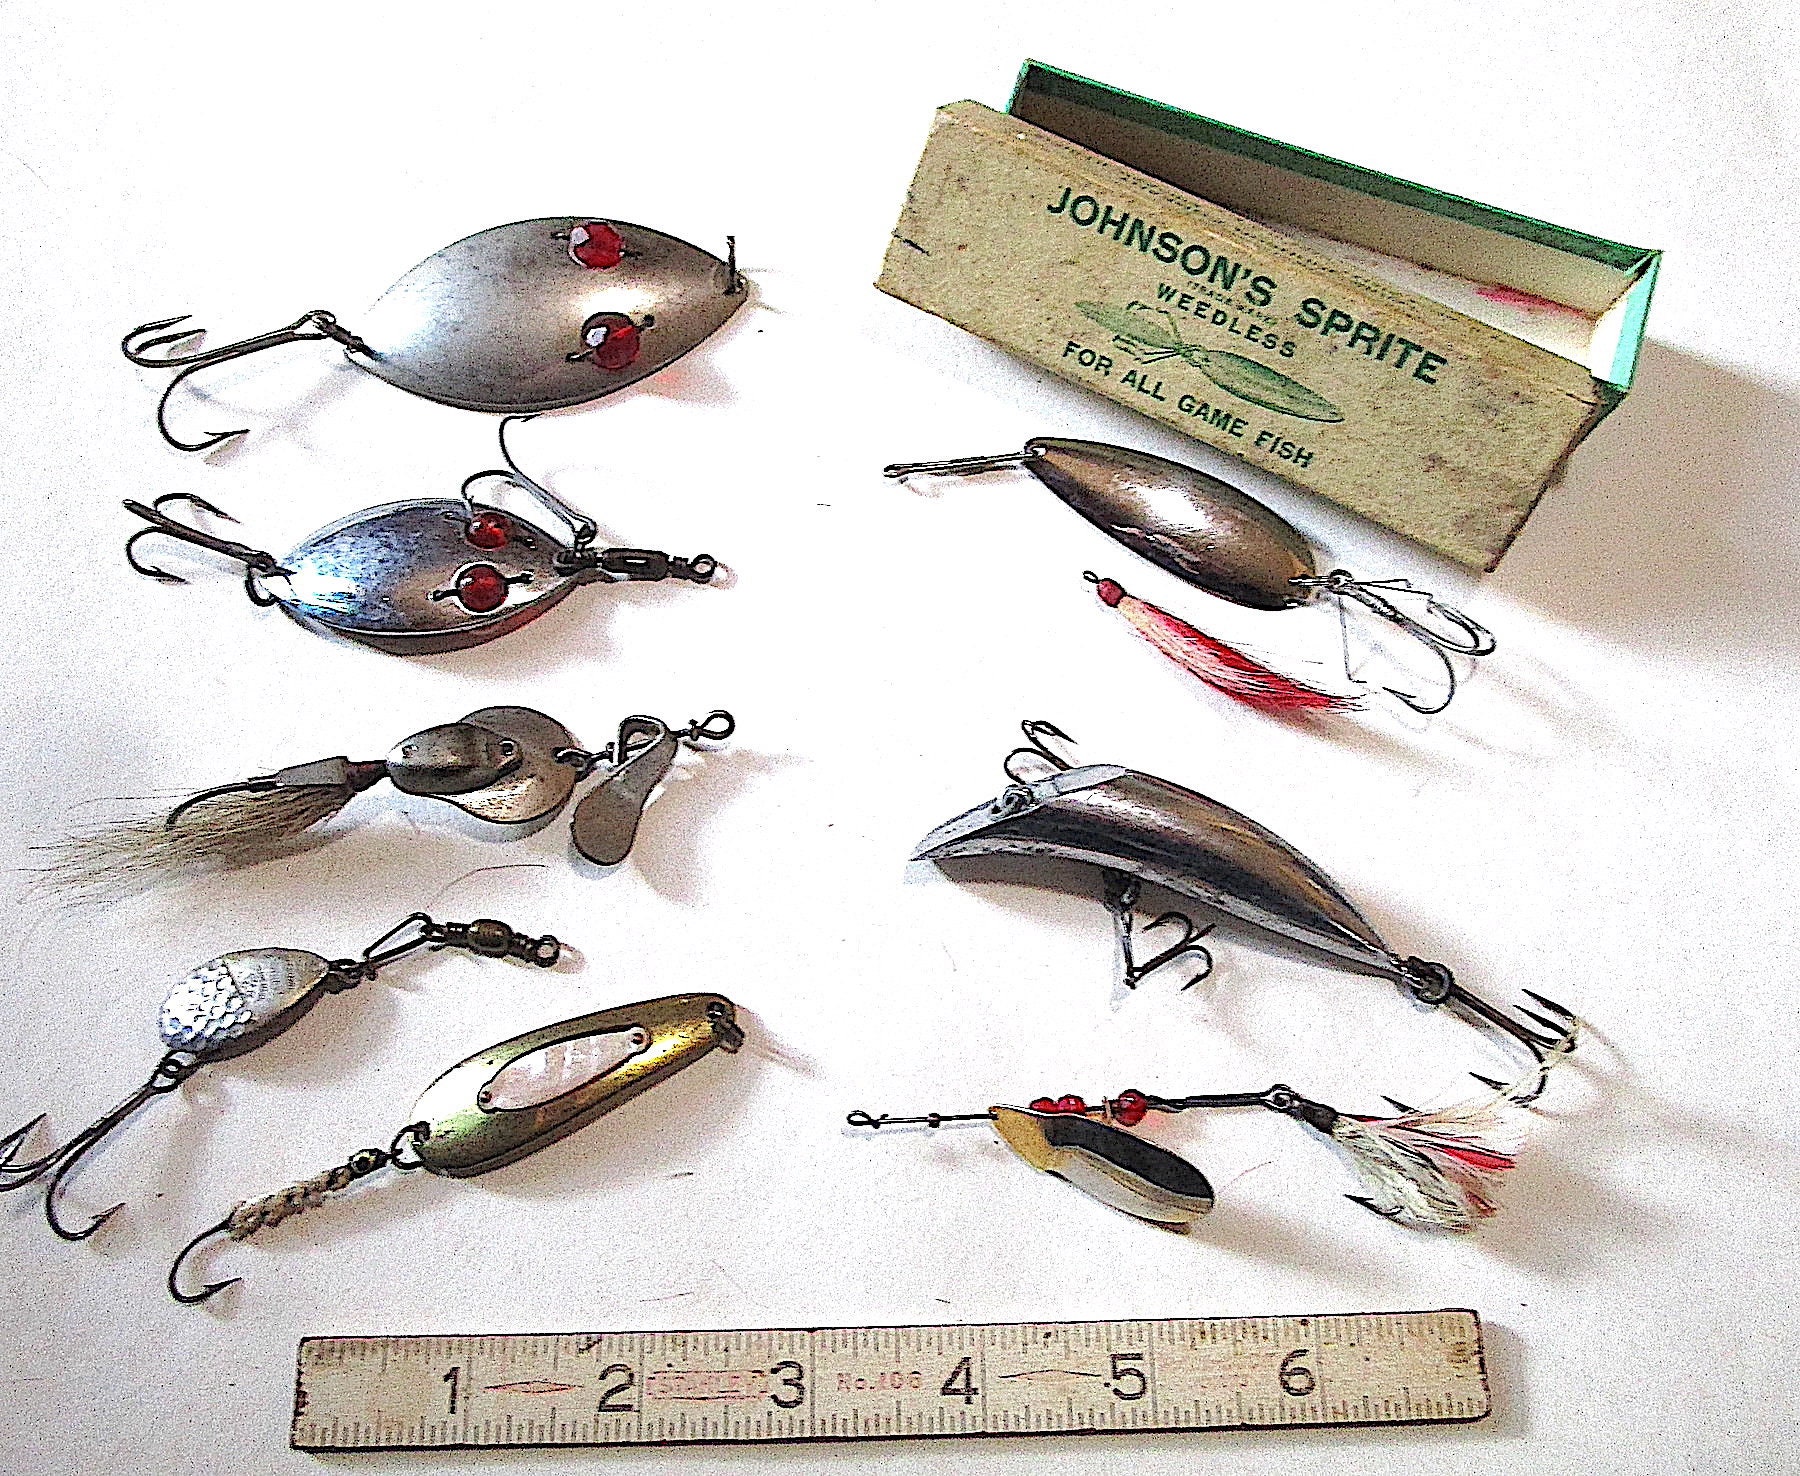 Set of 6 Antique/vintage Fishing Lures, Tackle, Gear, Freshwater,  Saltwater, Fishing, Folk Art, Handmade, Bait, Listing is for Set of Six 